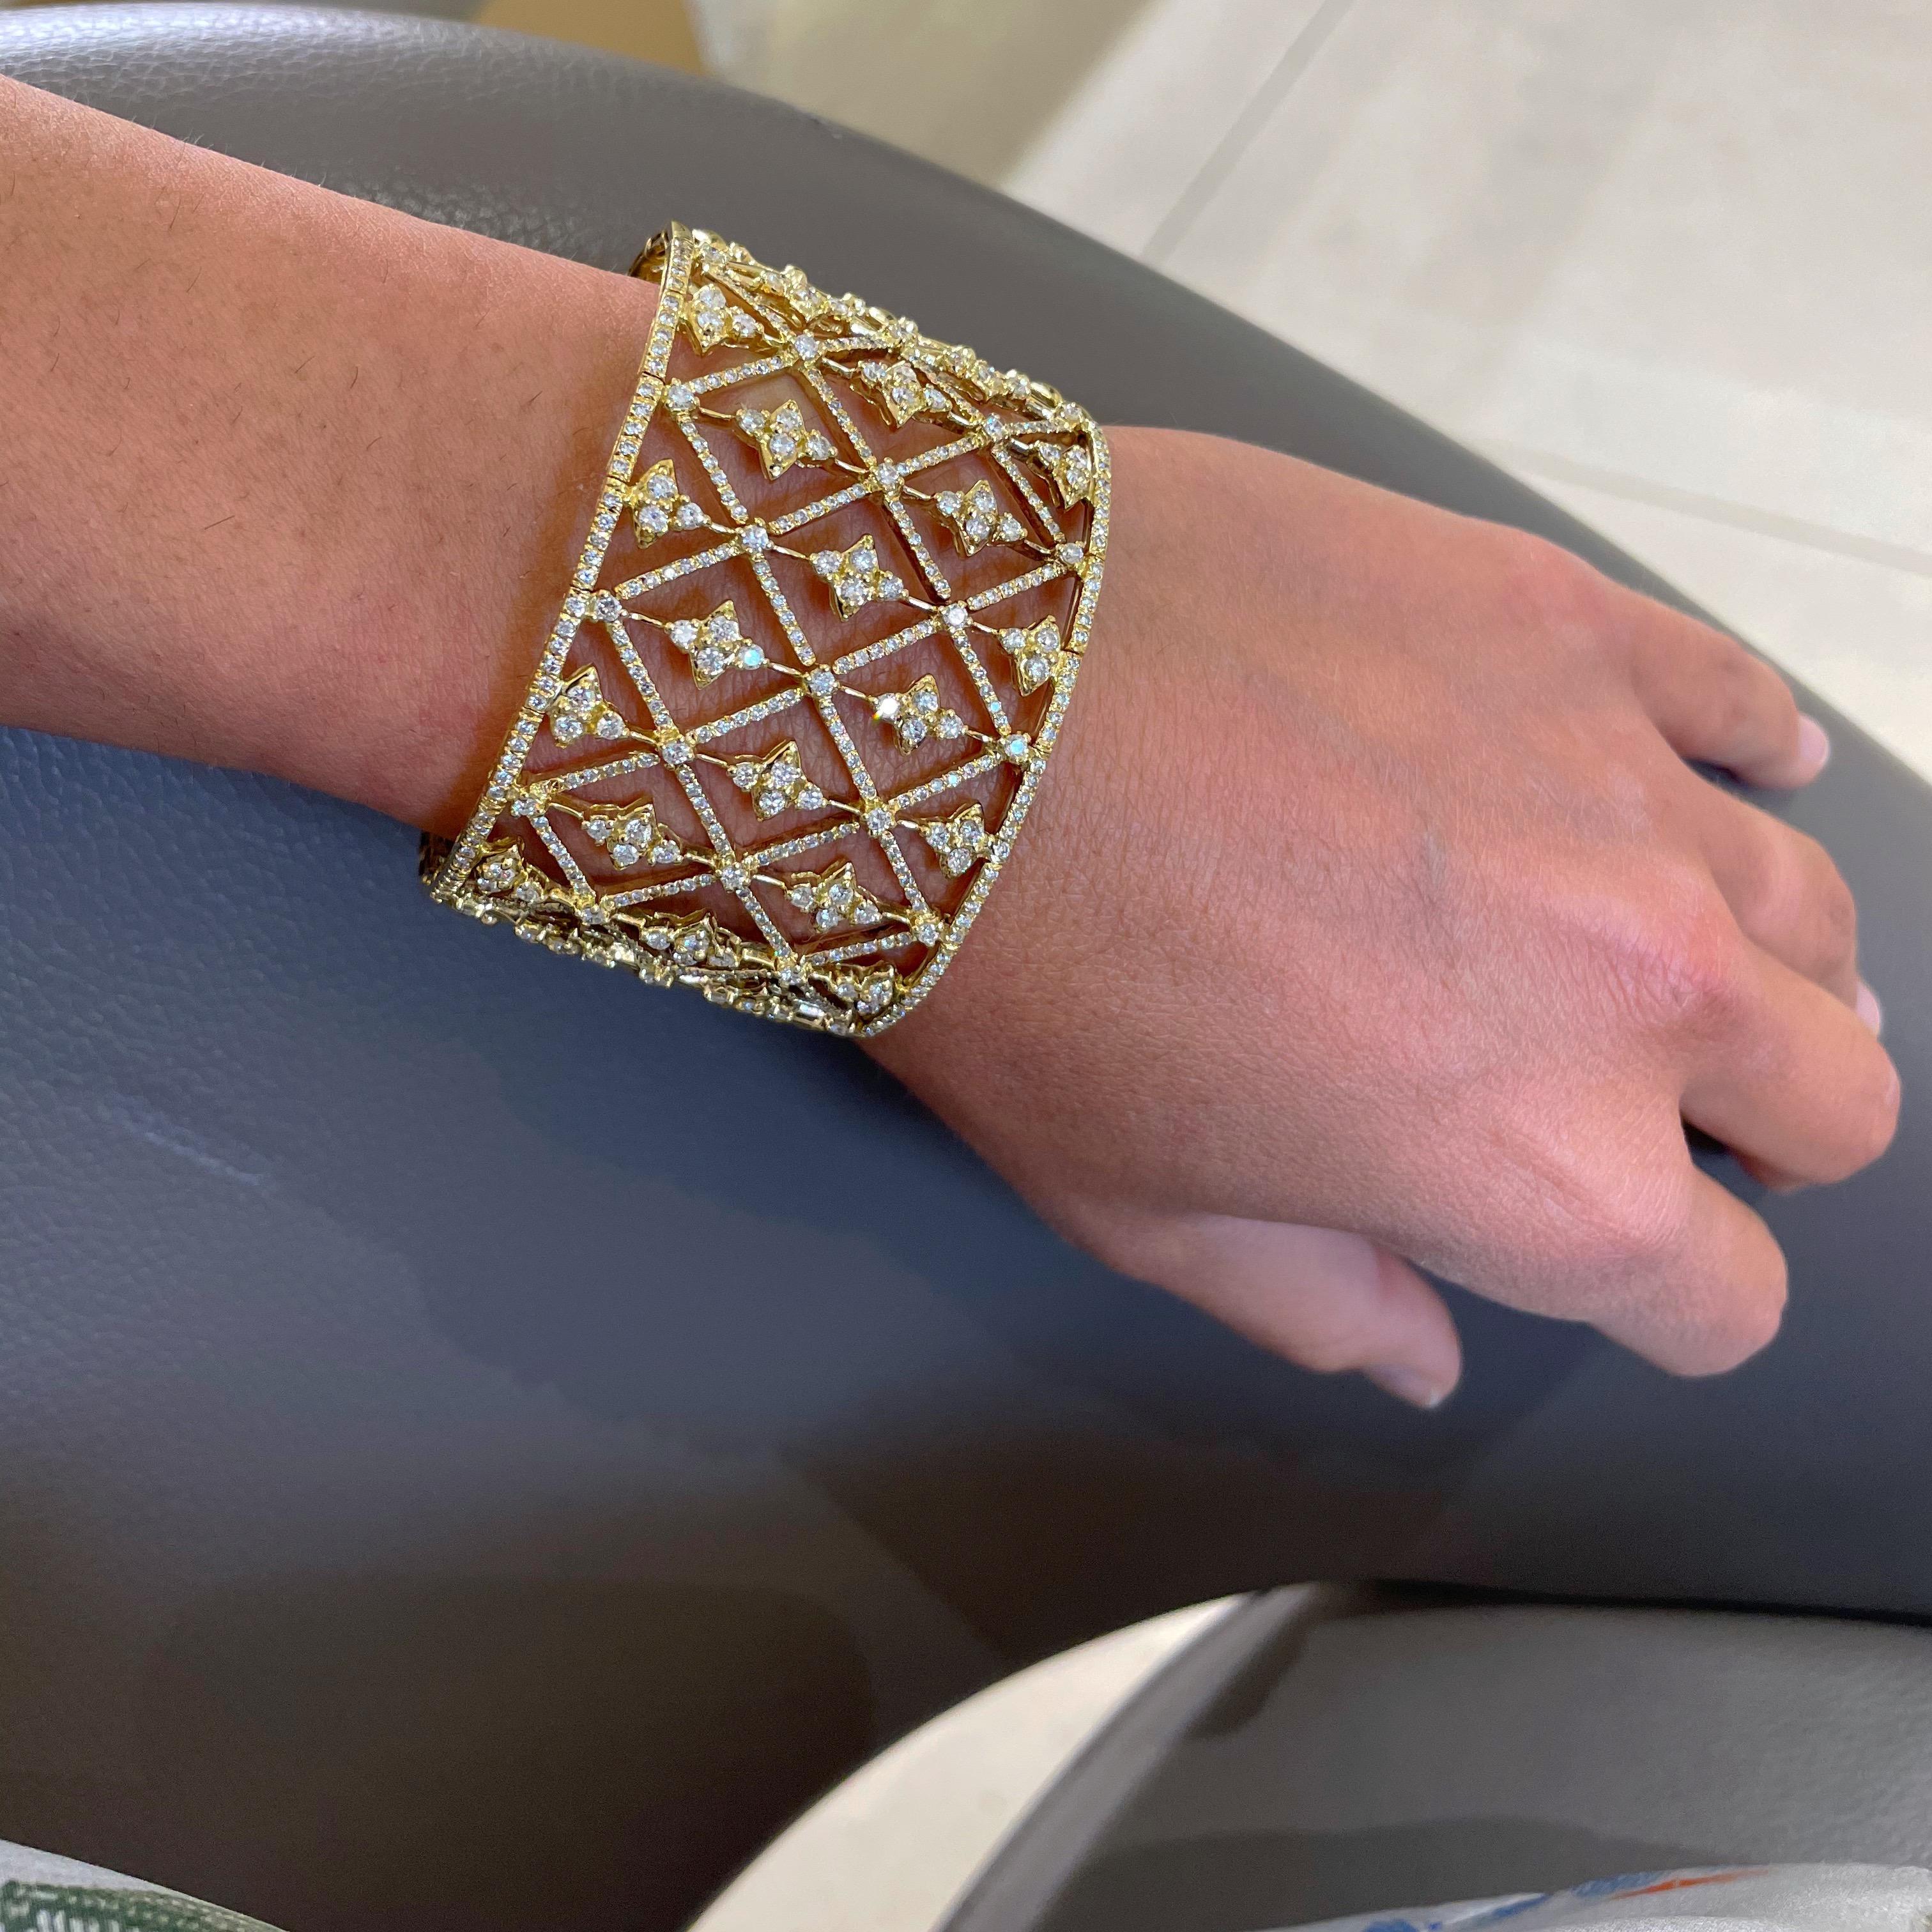 Elegant and extremely wearable is the best way to describe this 18 karat yellow gold and diamond cuff bracelet. The 1.5